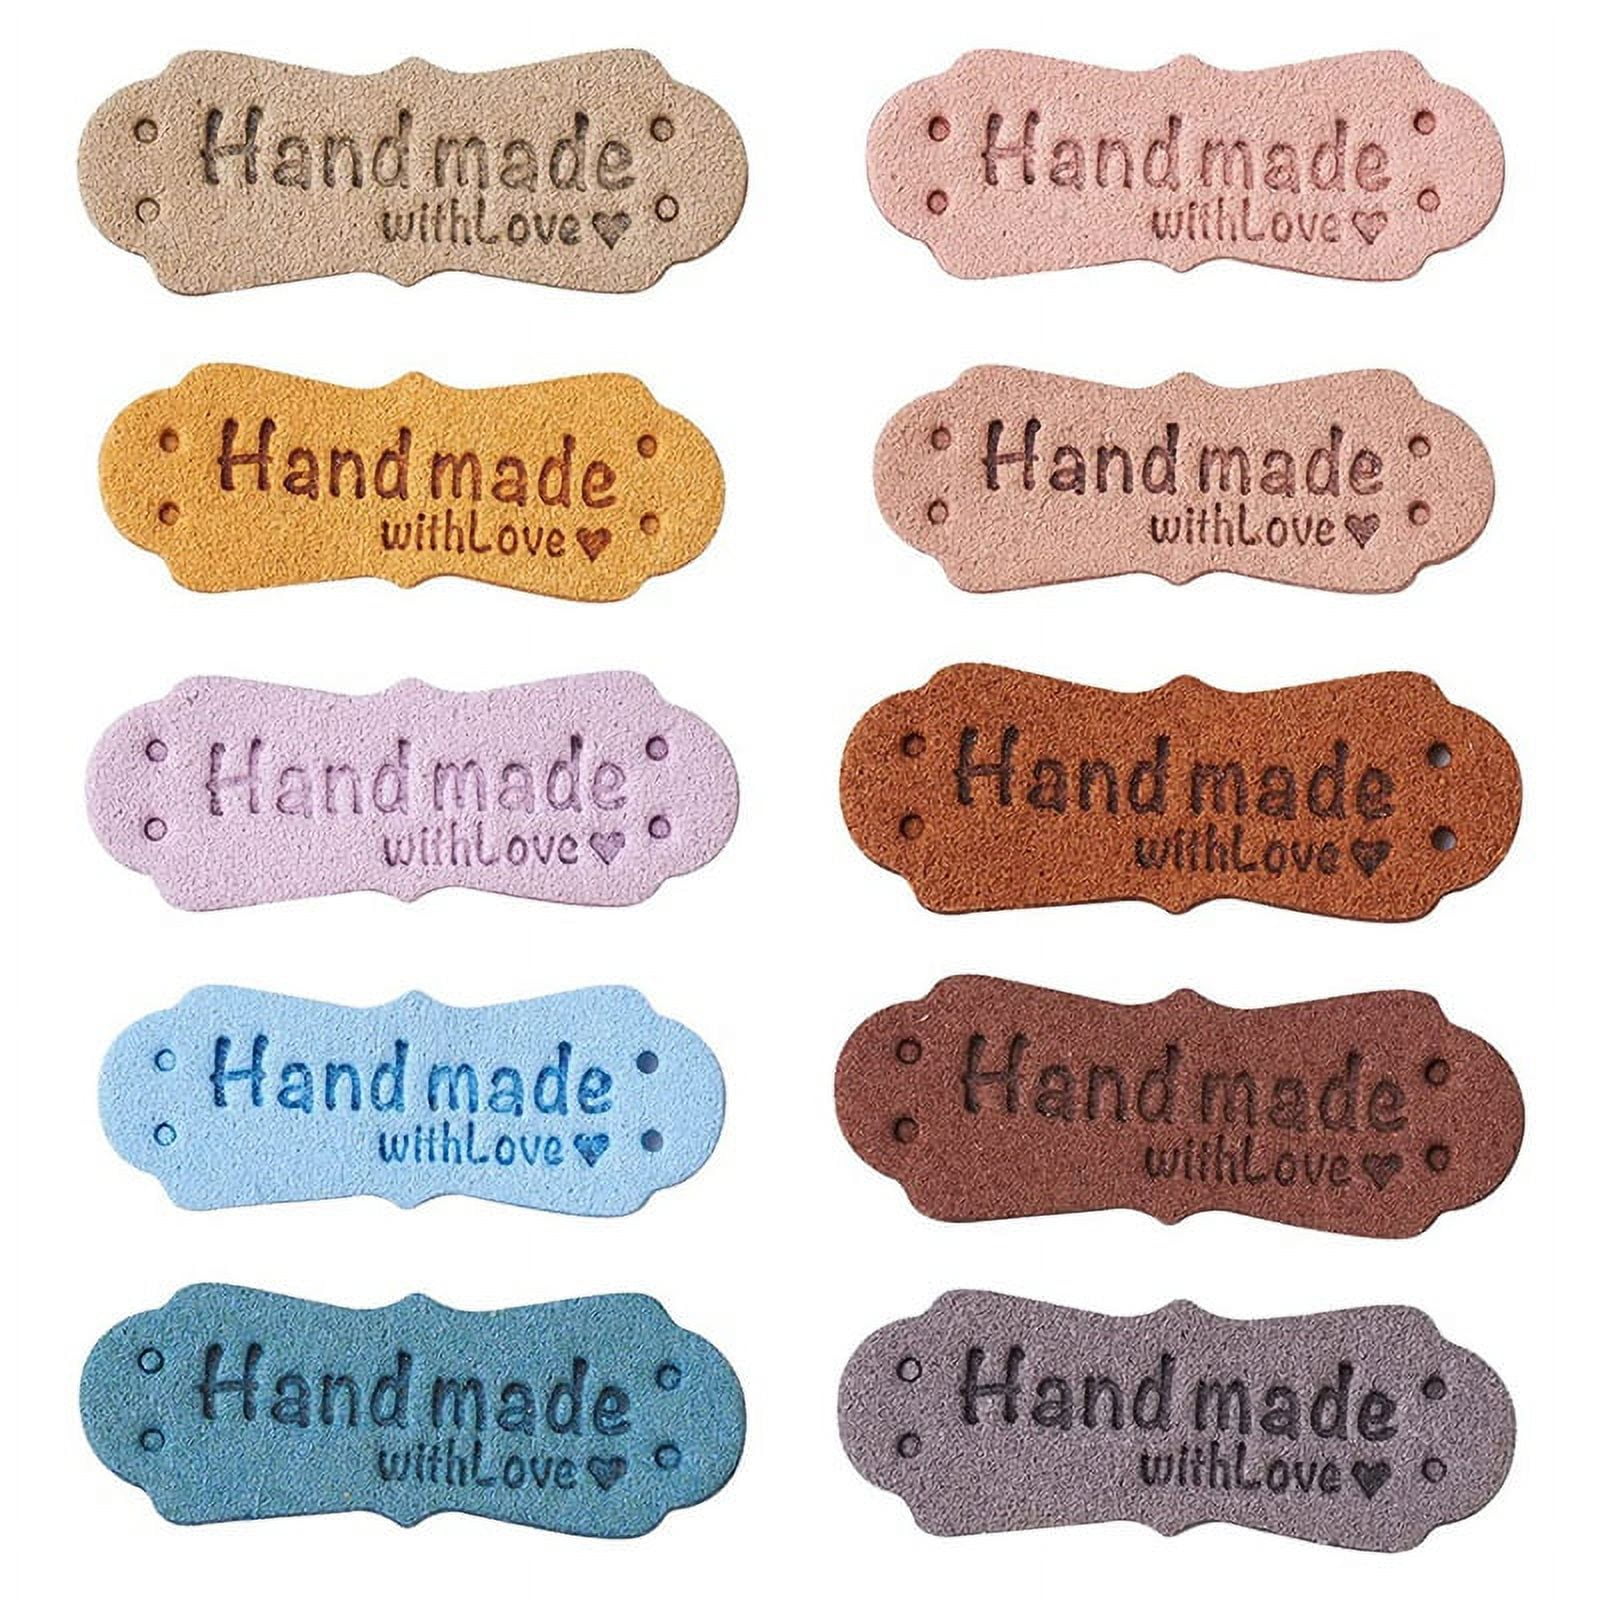 50Pcs PU Leather Labels Tags for Handmade DIY Hats Bags with Love Label for  Clothes Sewing Tags Accessories 